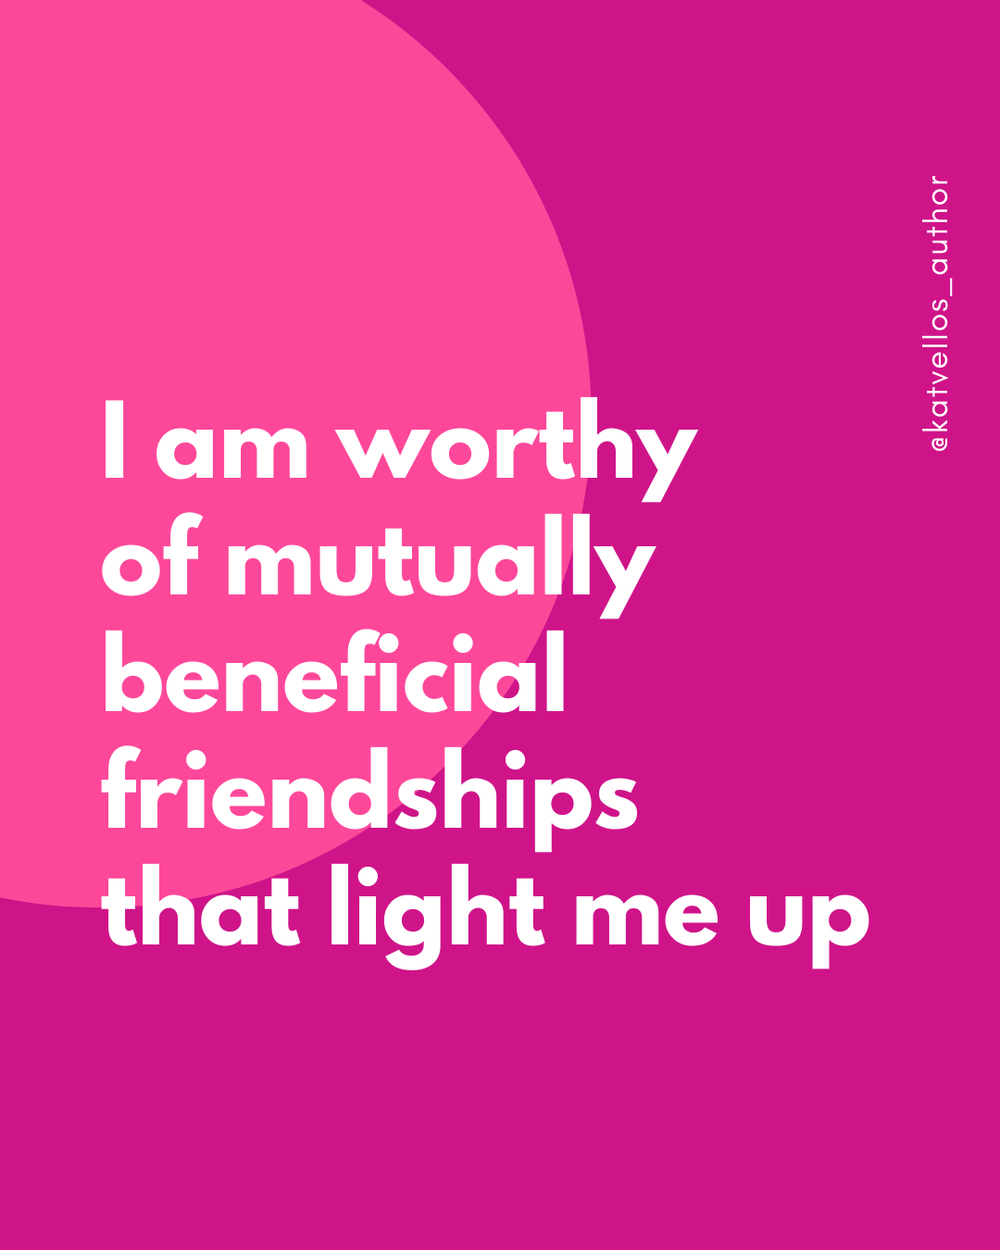 Friendship Affirmations by Kat Vellos at weshouldgettogether.com8.png